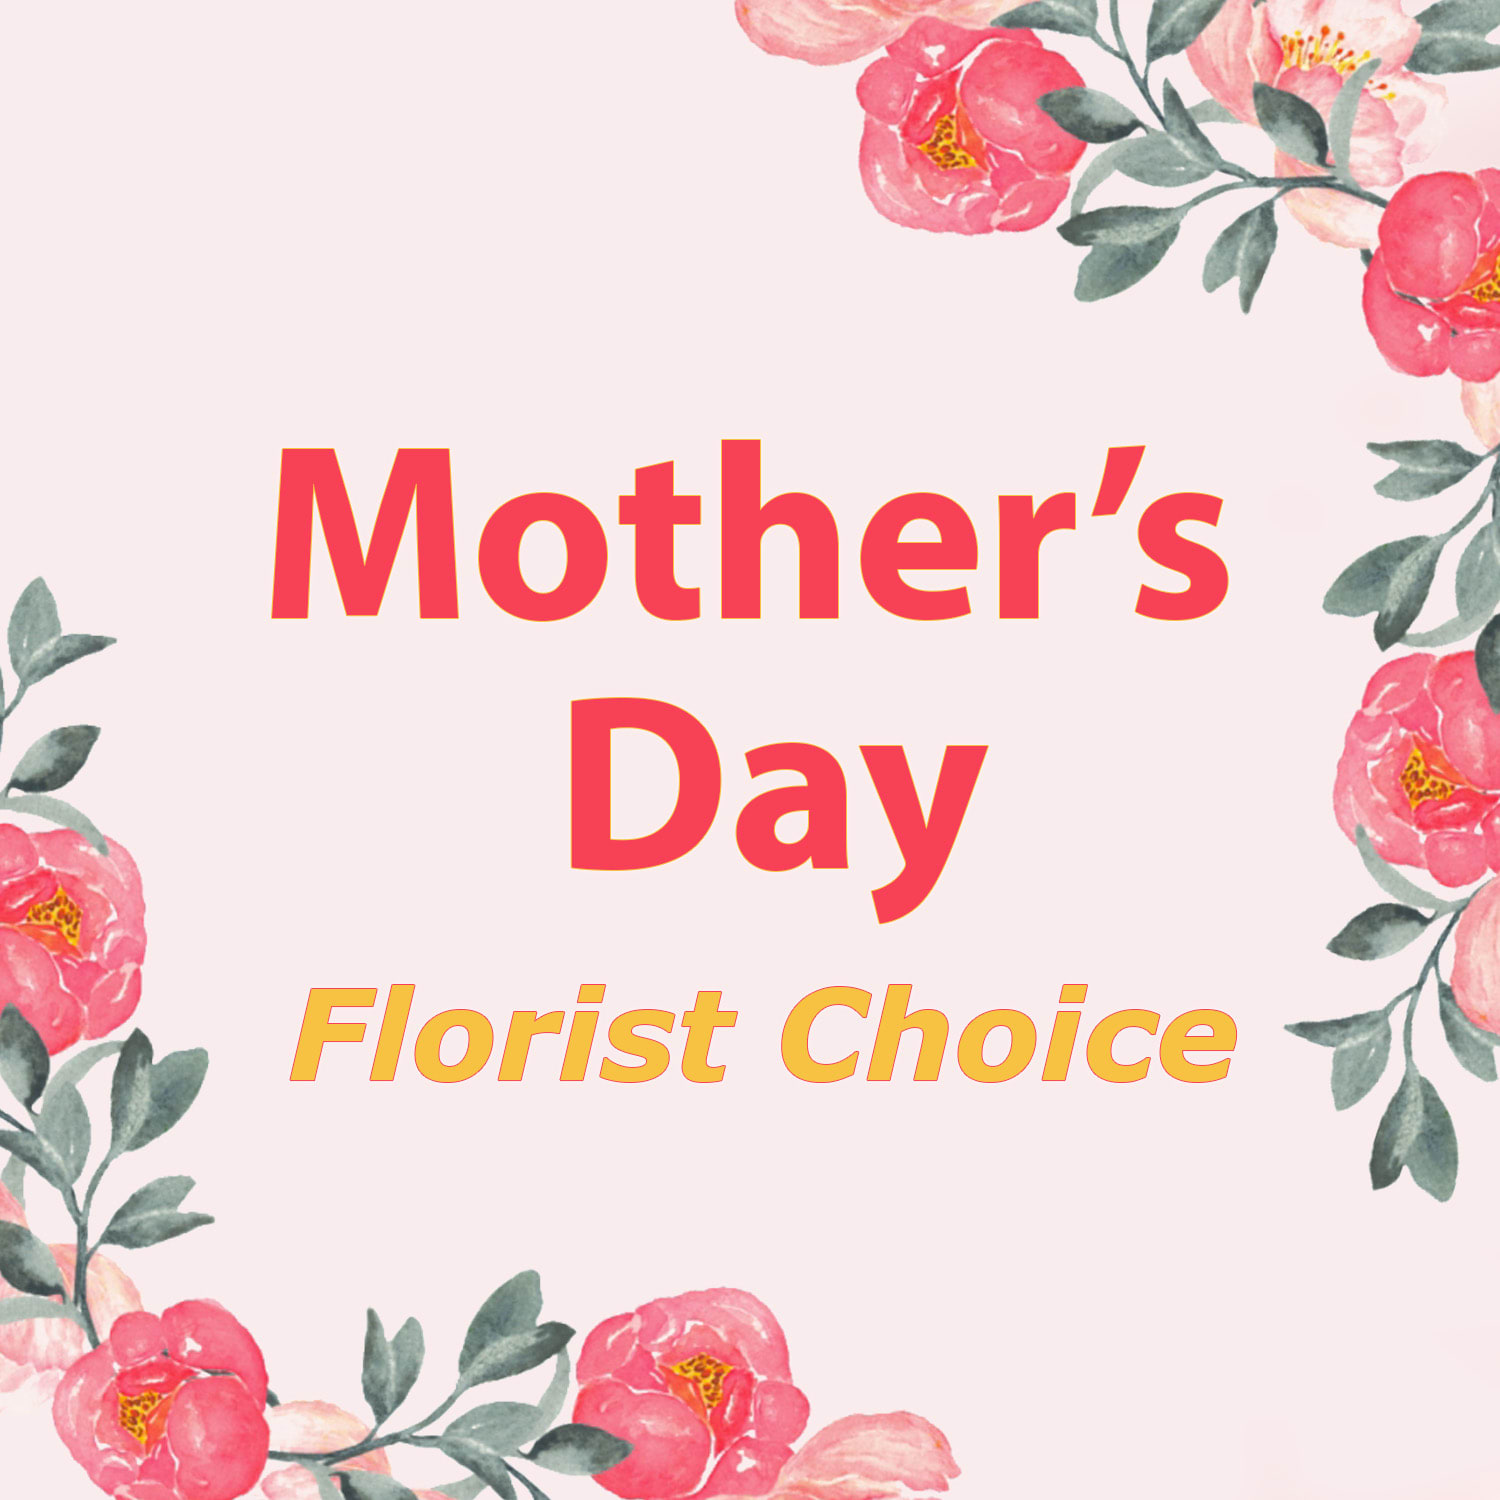 Mother's Day -Florist Choice - Mother's day, and the spring season, brings hundreds of varieties of blooms through our door. Let us design a custom artisan mixed bouquet filled with seasonal flowers and Mother's Day colors that will be sure to celebrate the importance of Mom, and all she does! 